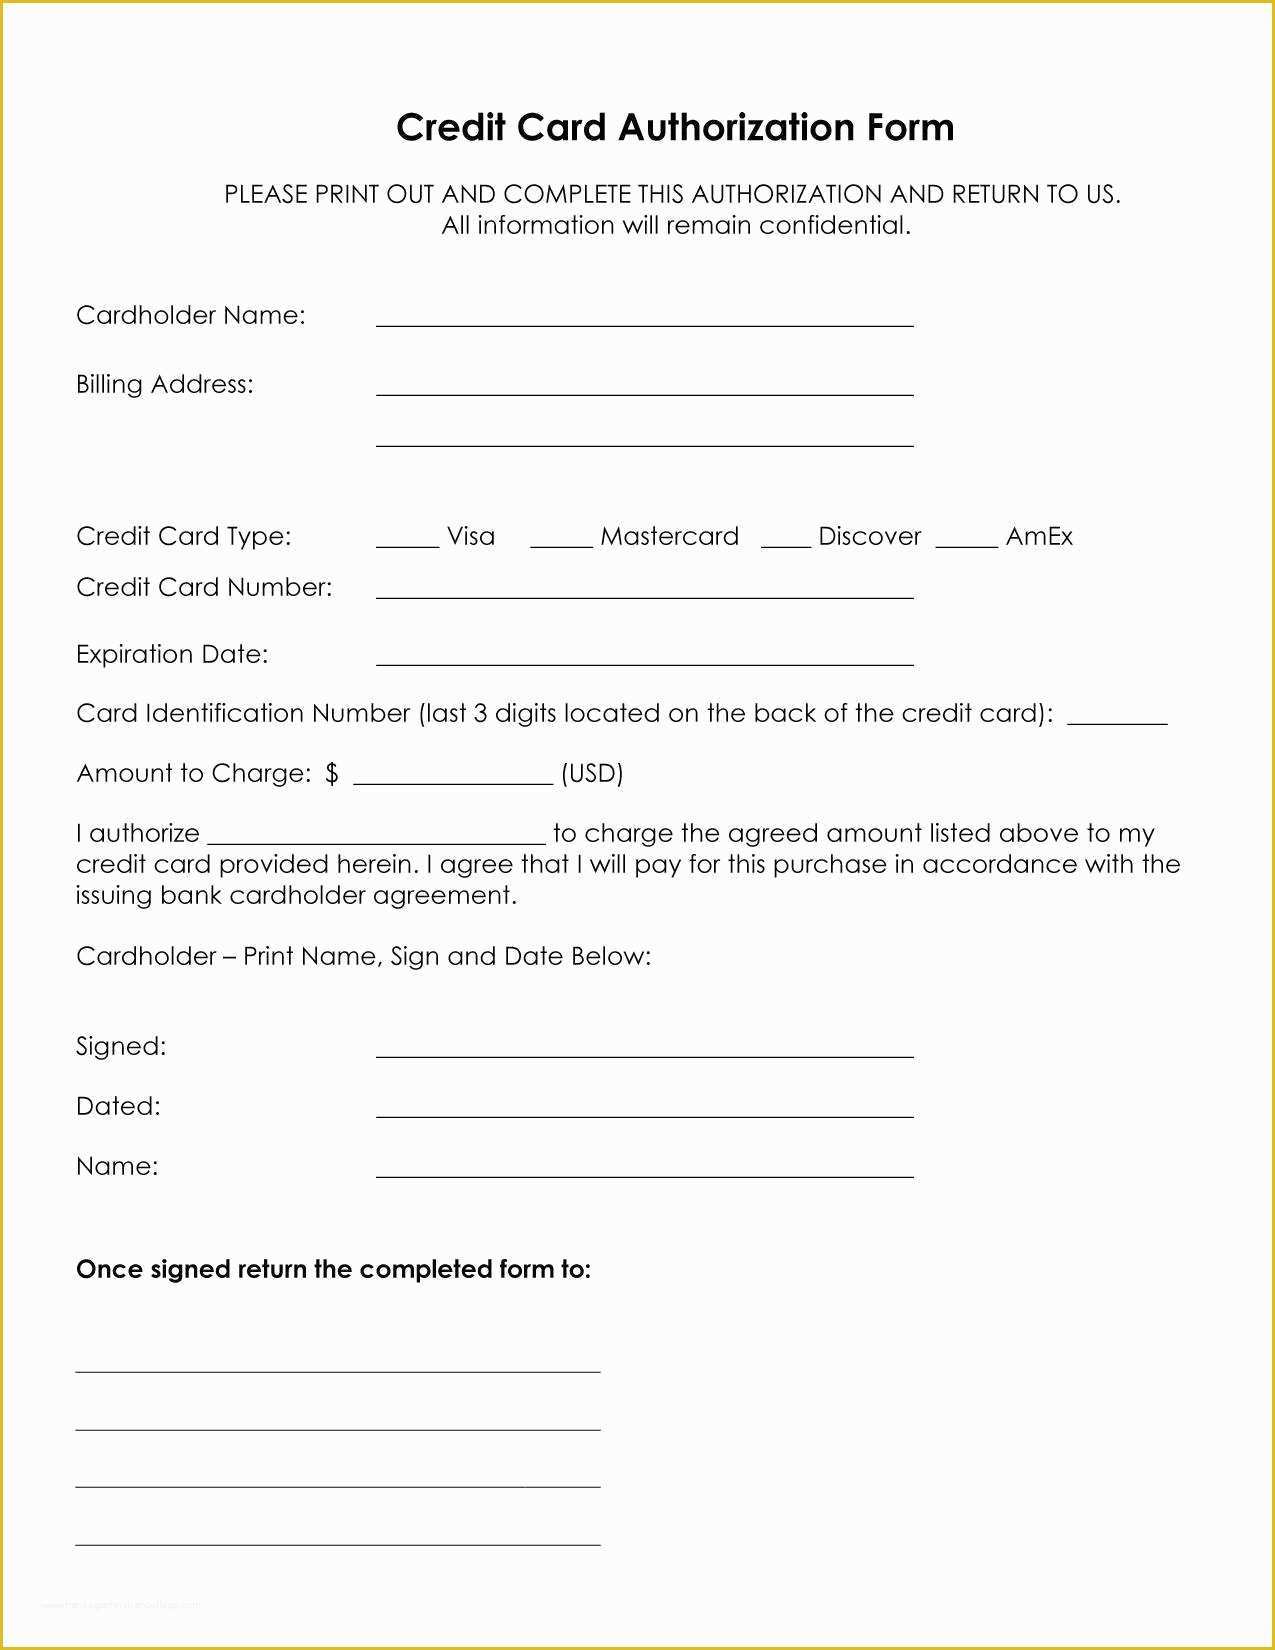 Free Credit Card Authorization form Template Word Of Authorization for Credit Card Use Free forms Download